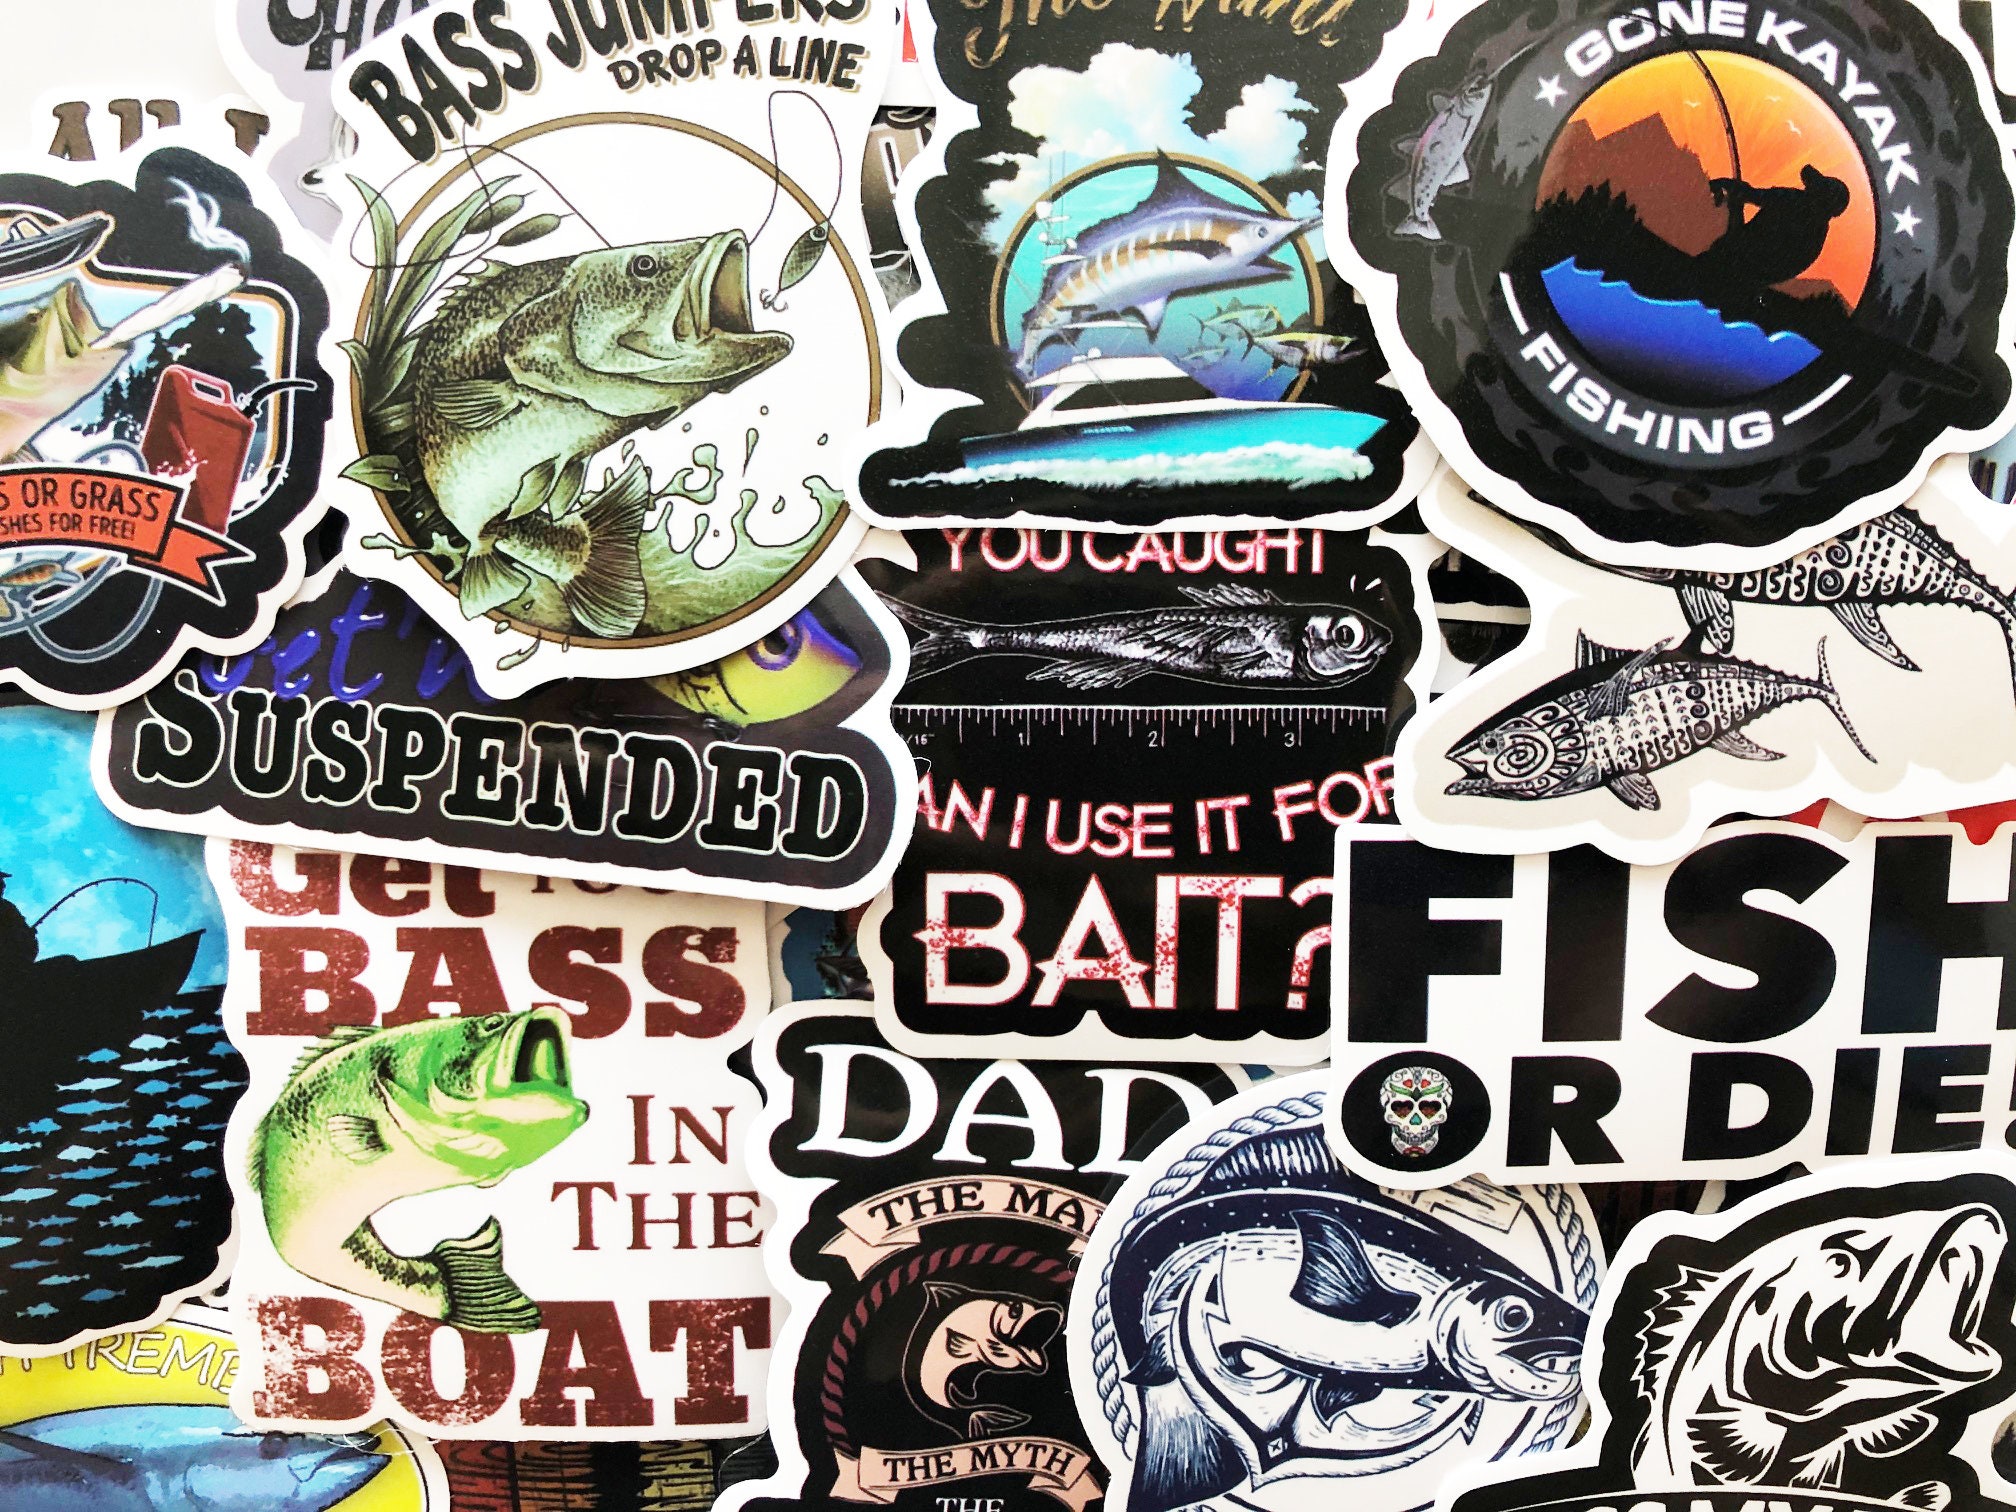 50 Fishing Nature Stickers Laptop Car Bumper Boat Box Decals Fish Angling #CJ 